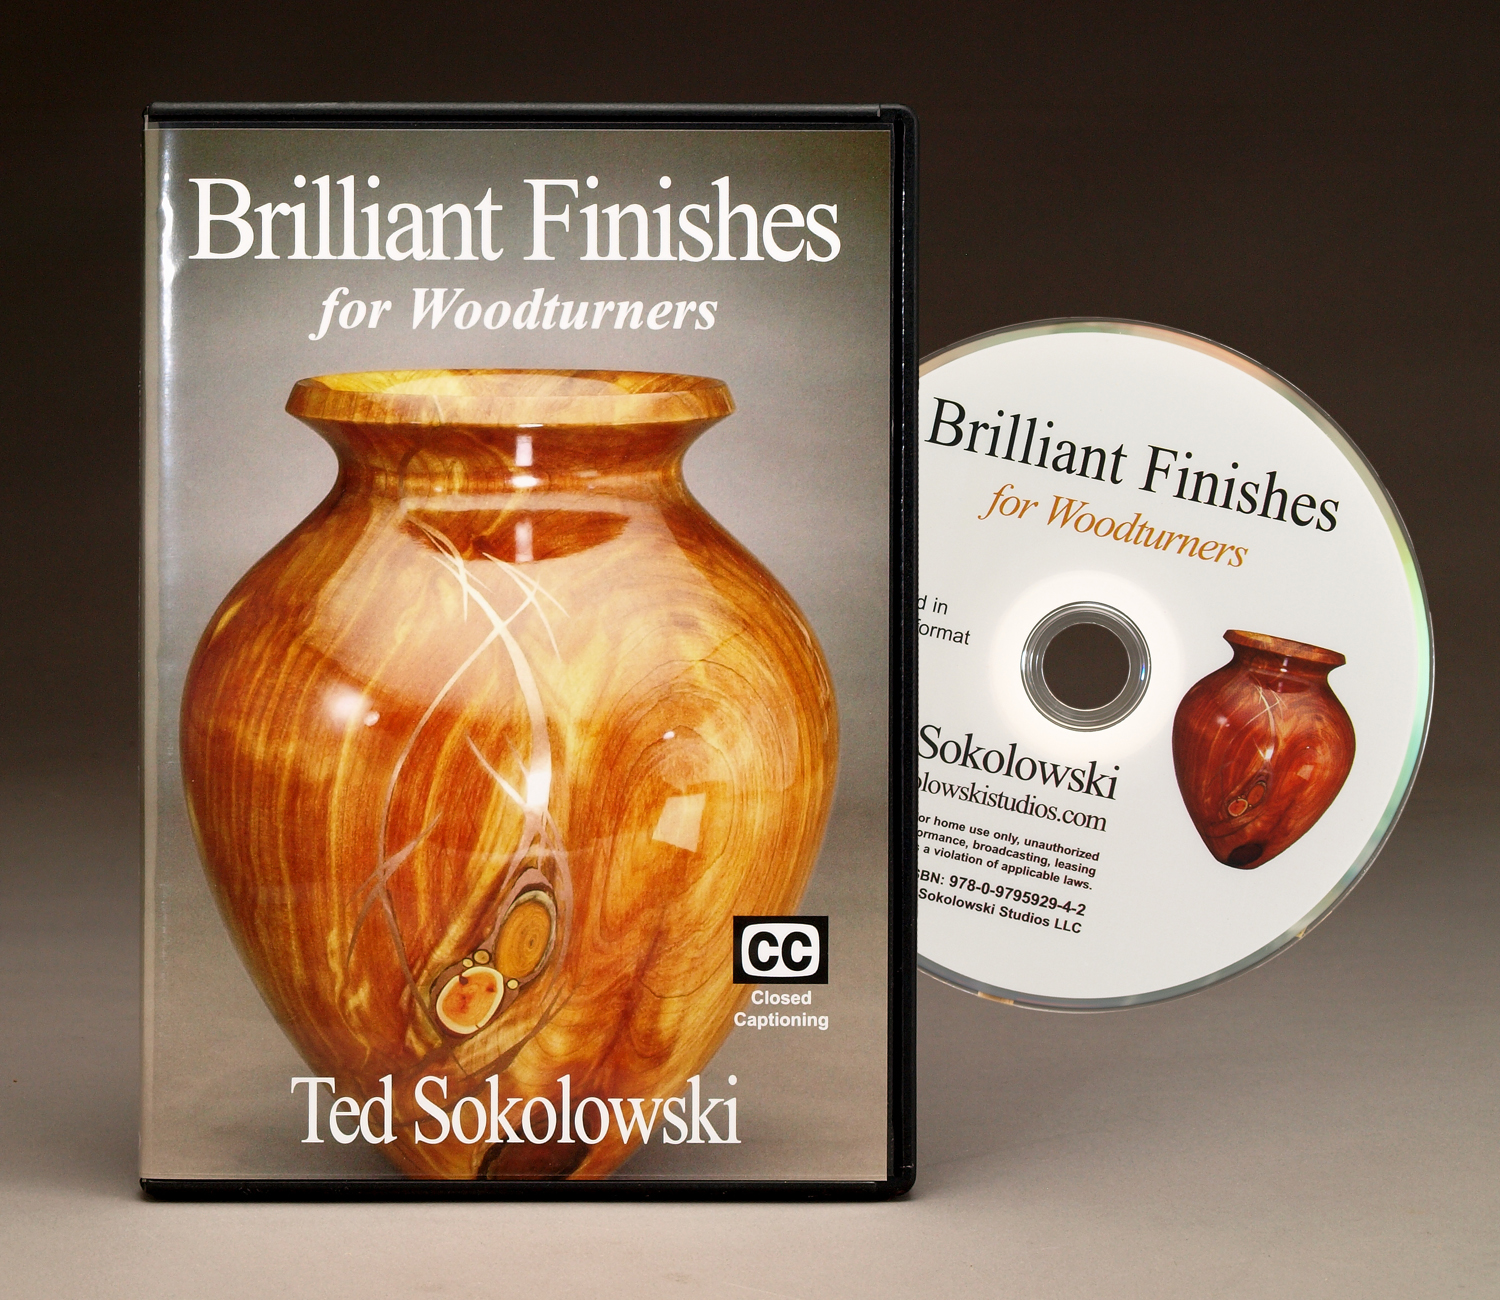 Brilliant Finishes for Woodturners DVD Cover and disc